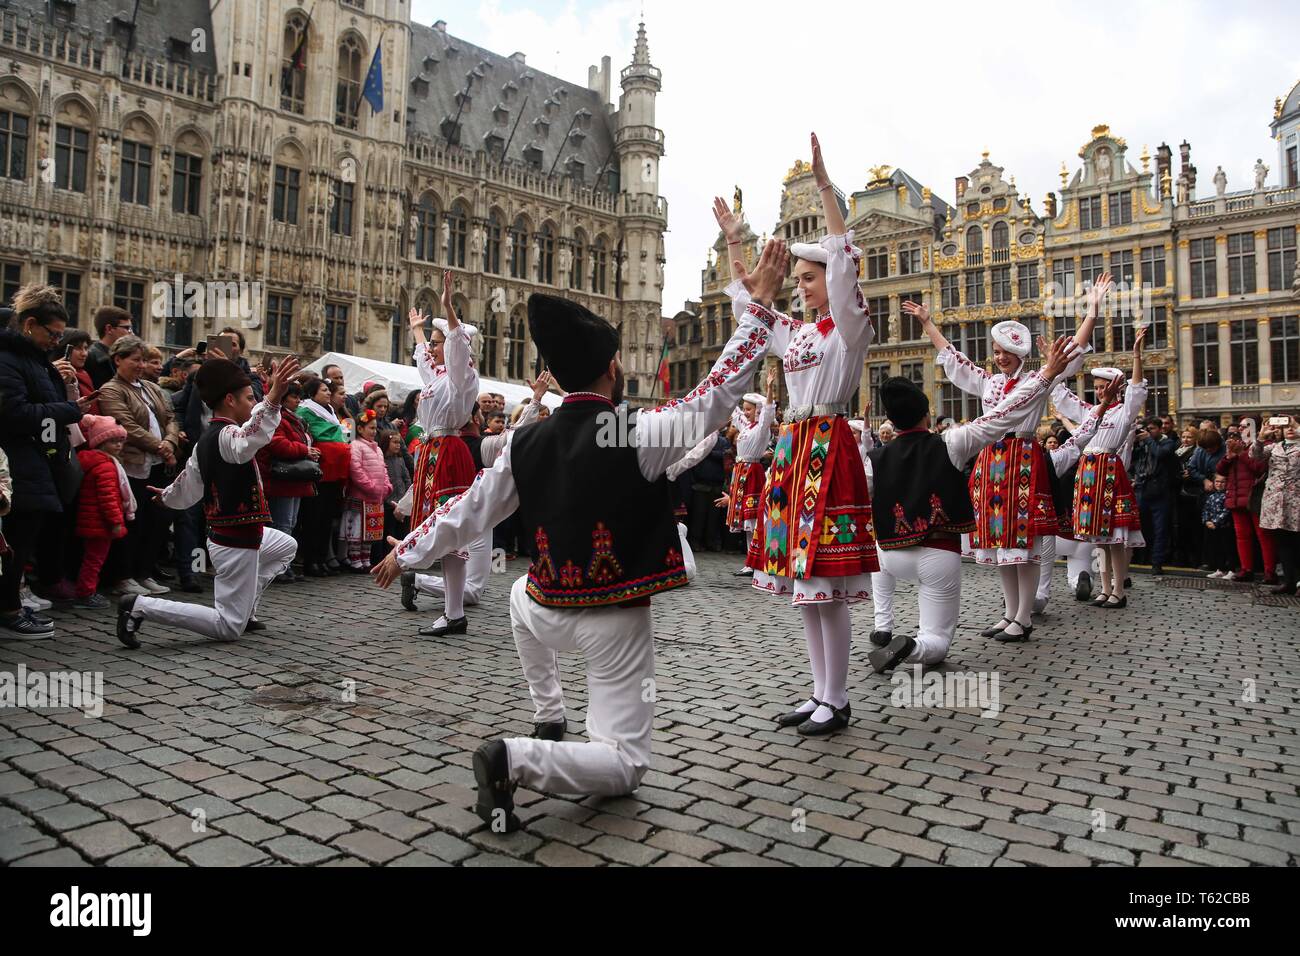 Brussels, Belgium. 28th Apr, 2019. Dancers perform the Bulgarian folk dance on the last day of the 2019 Balkan Trafik at the Grand Place in Brussels, Belgium, April 28, 2019. The festival aims to share the artistic and festive cultures of the Balkans in south-eastern Europe. Credit: Zheng Huansong/Xinhua/Alamy Live News Stock Photo